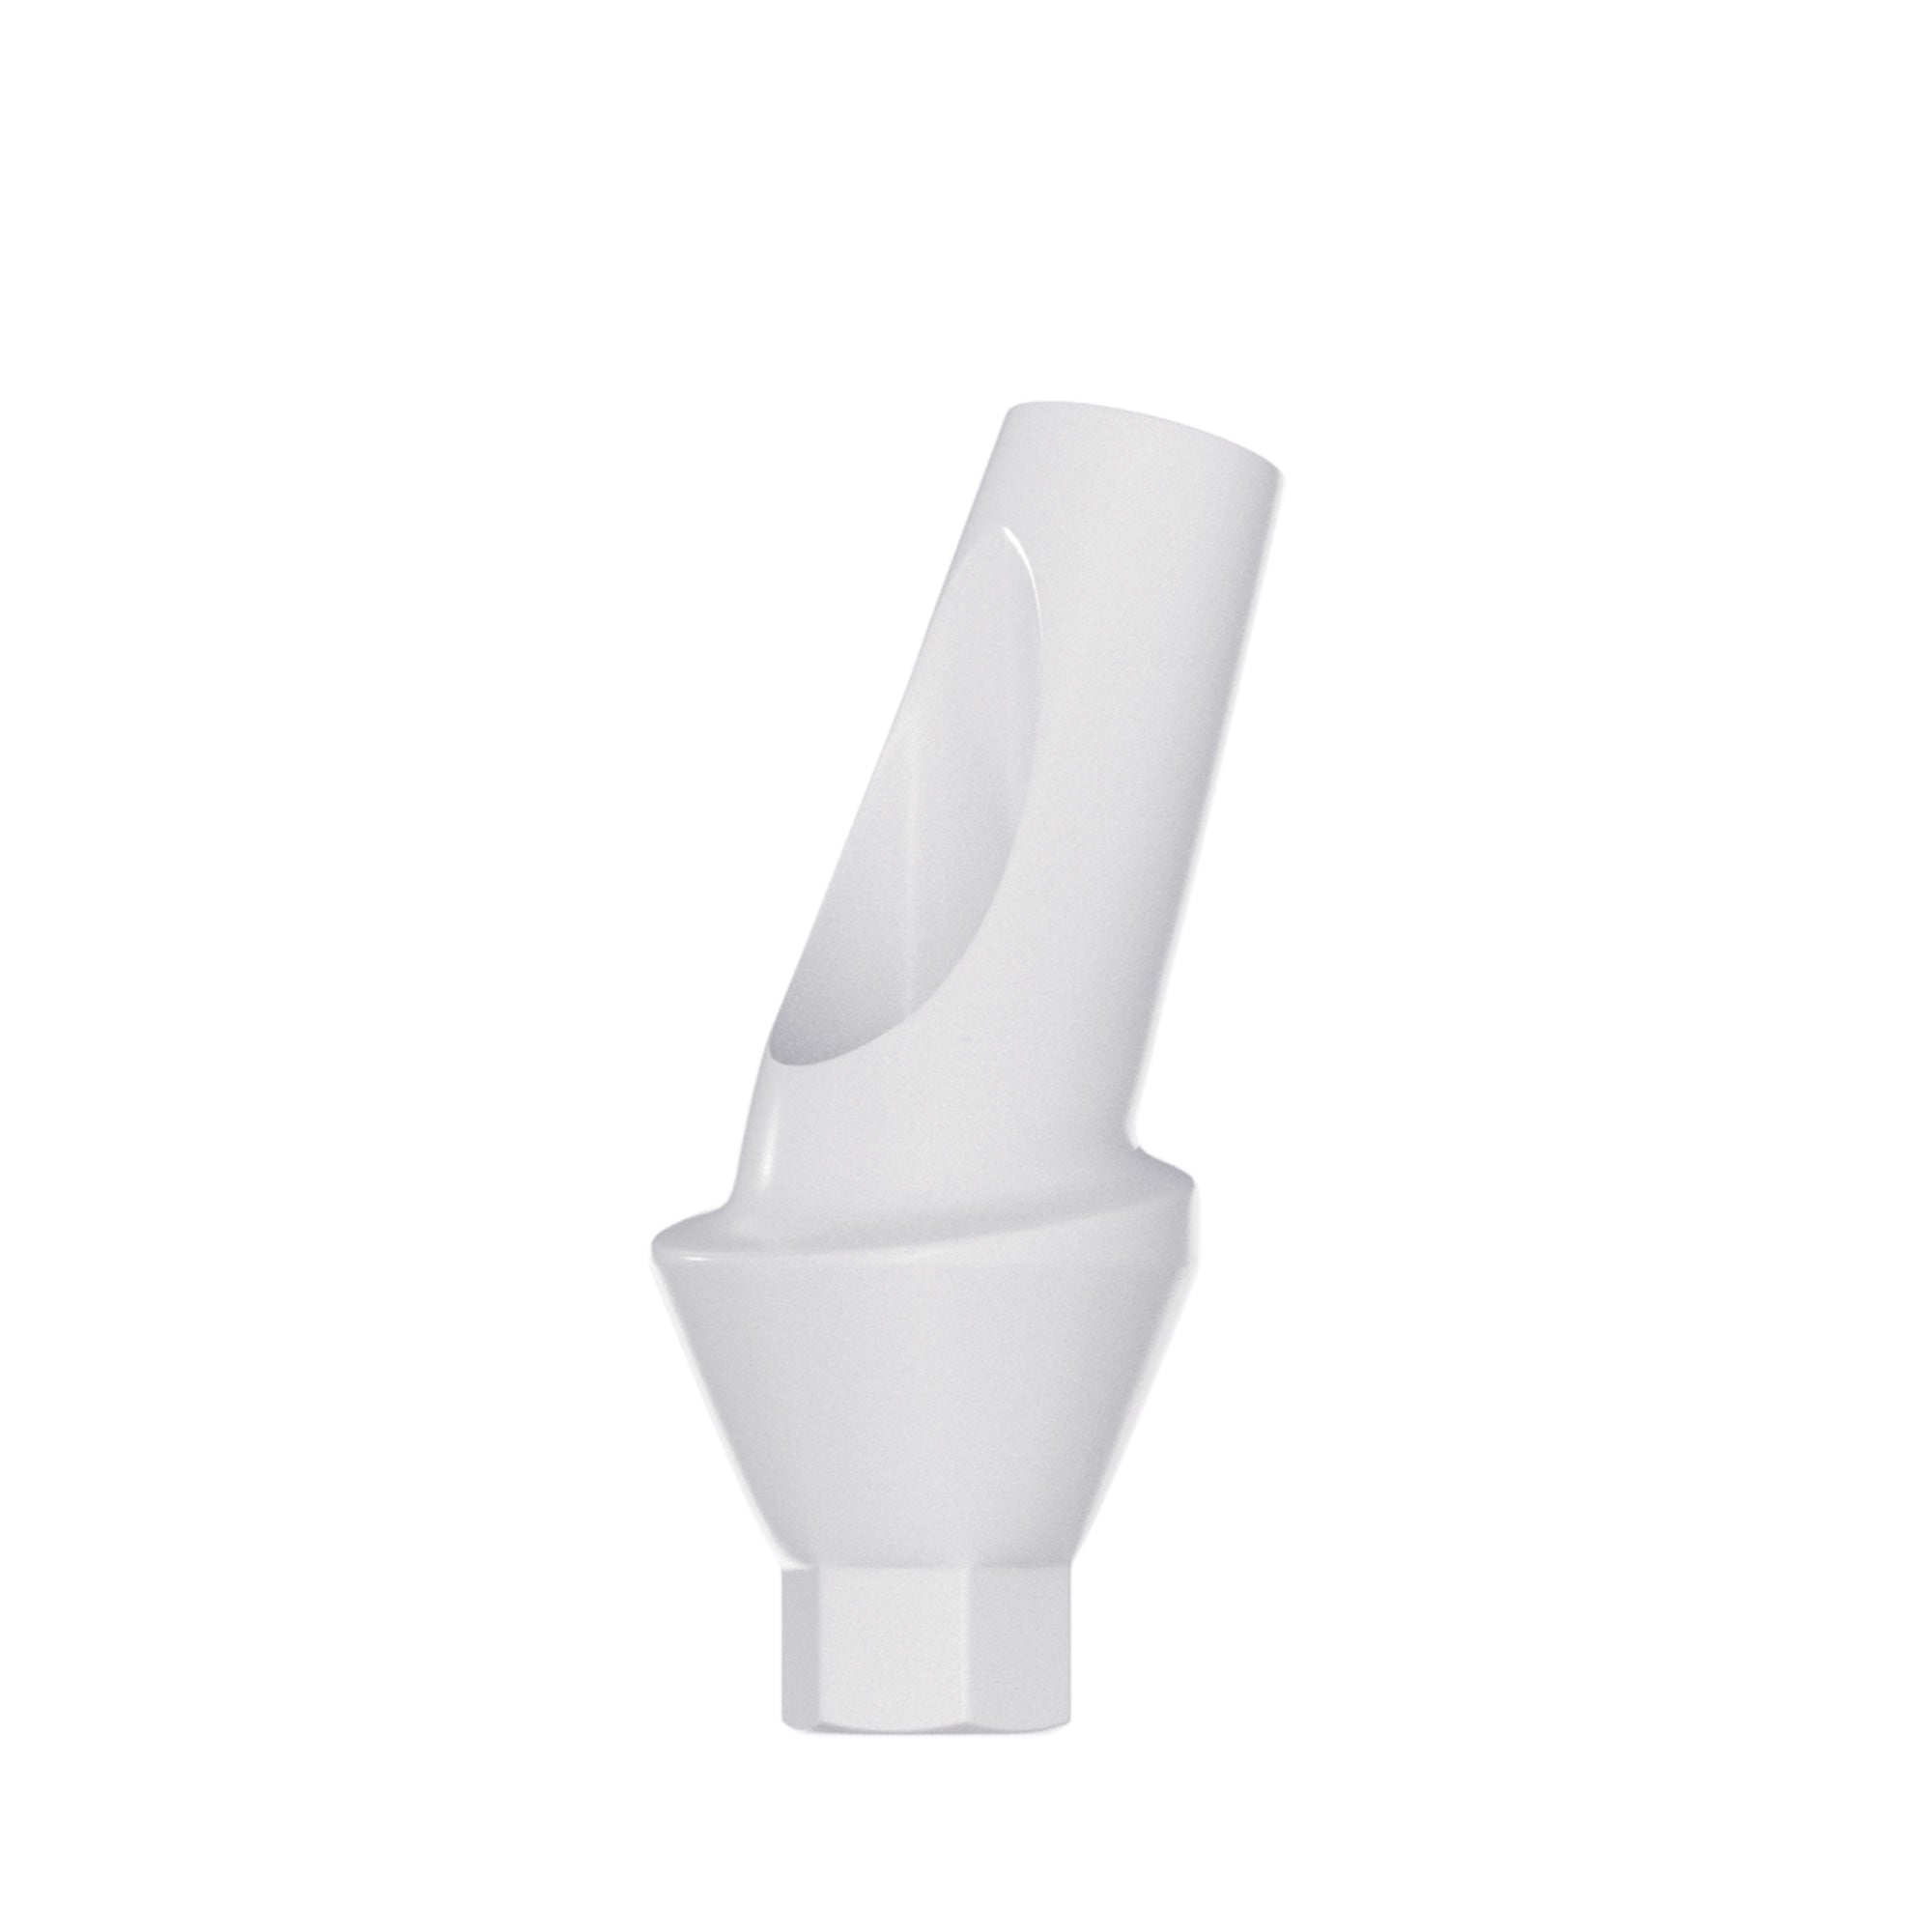 DSI Temporary Angulated 15° PEEK Abutment 3.8mm - Conical Connection RP Ø4.3-5.0mm